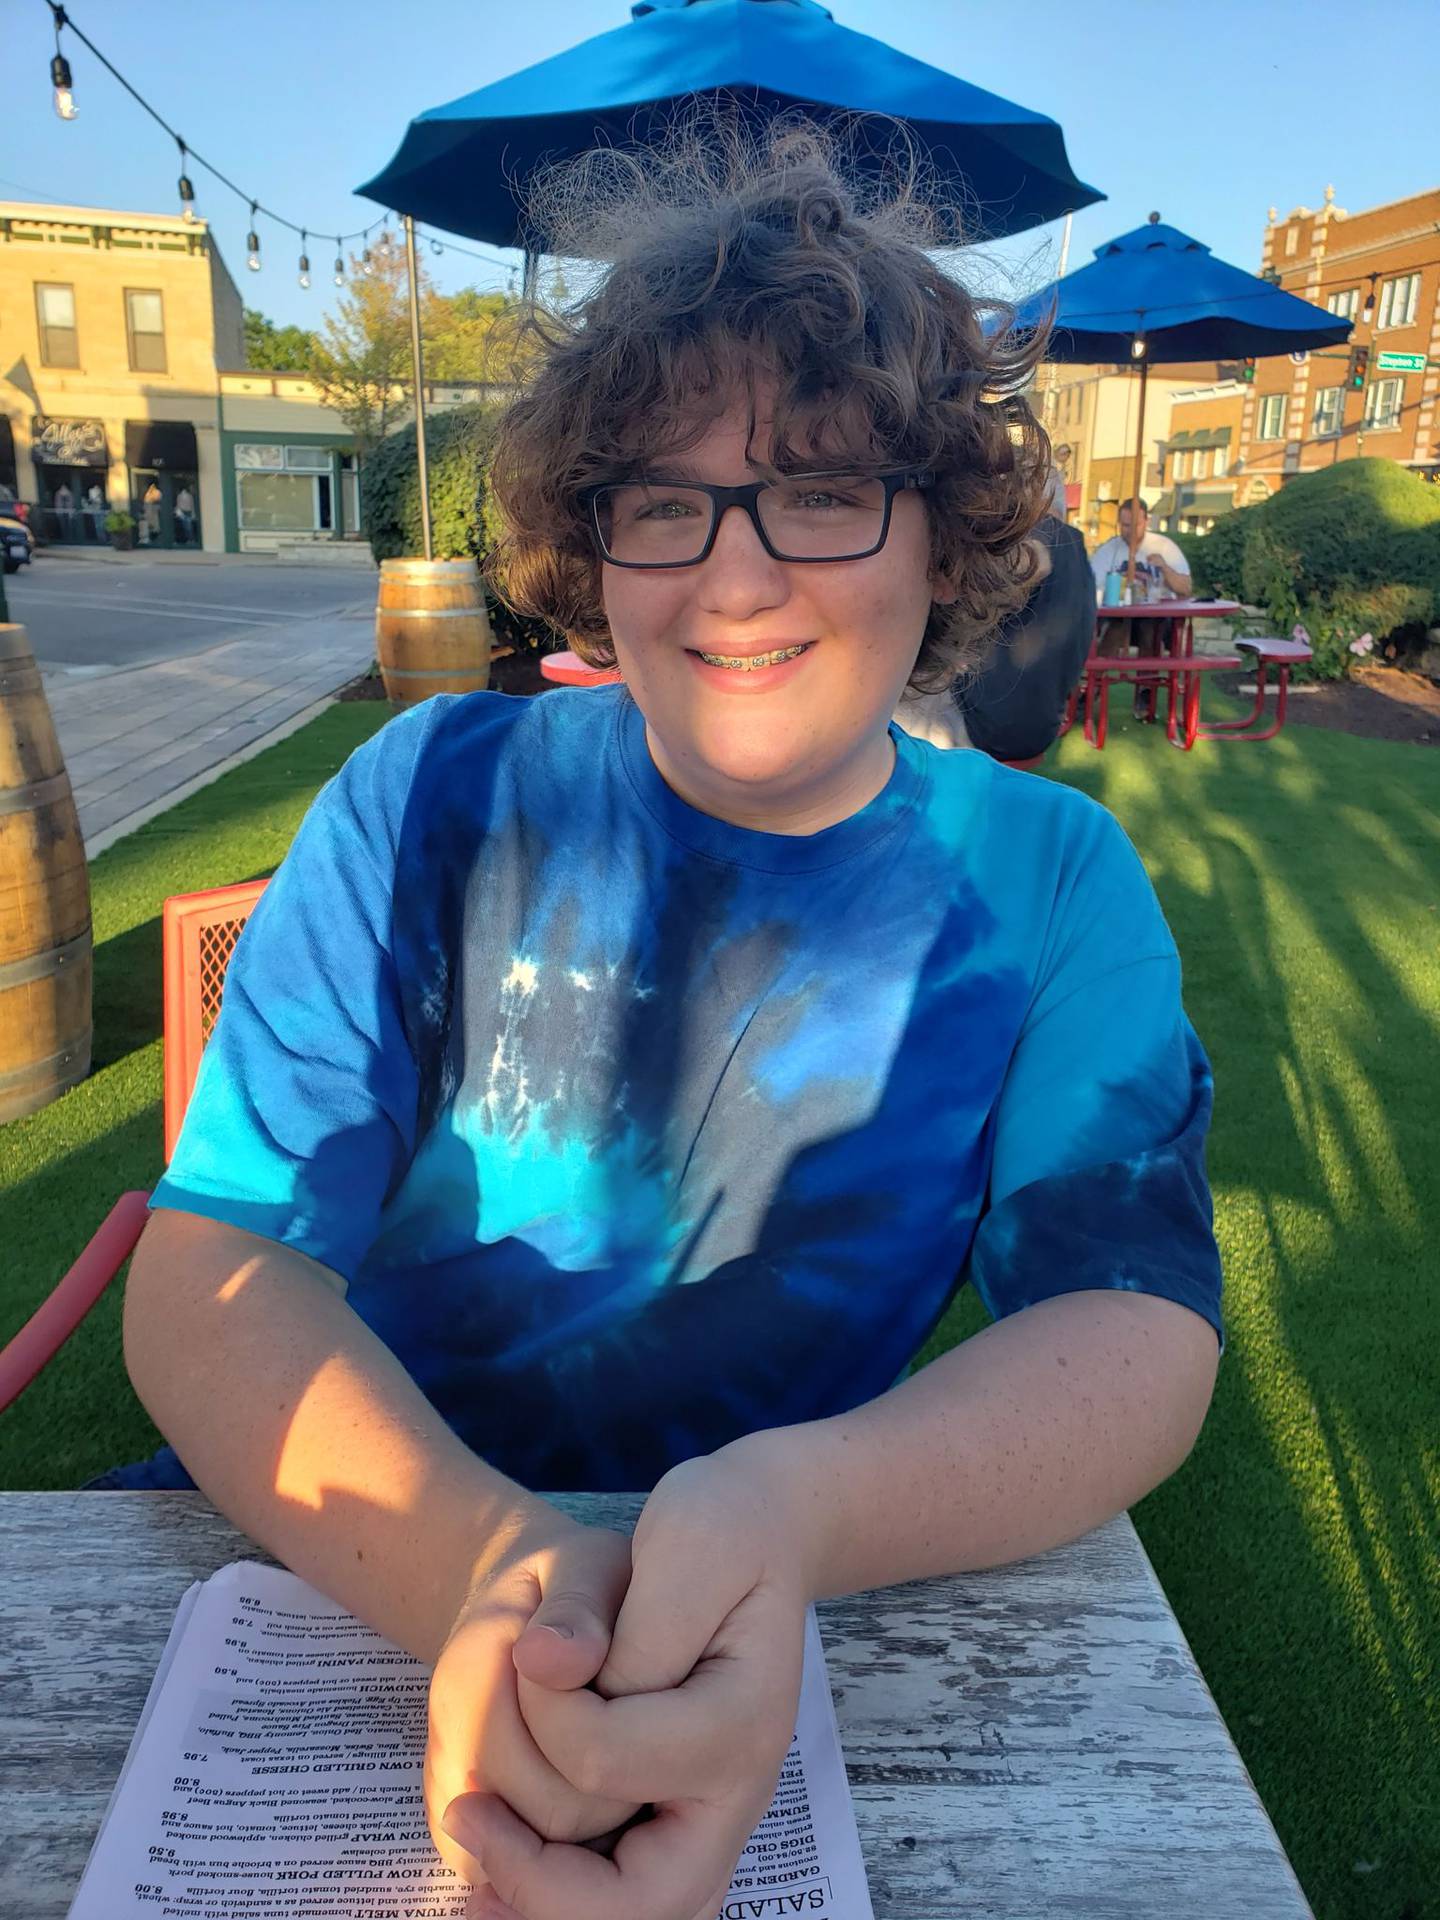 Vinnie Gincauskas, 15, of Lockport, has a rare soft tissue cancer called desmoplastic small round cell tumors or DSRCT. The cancer is aggressive but so is his treatment. “Benefit for Vinnie's Voyage” will be held from 4 to 11 p.m. Friday, June 10, 2022, at the Lockport American Legion.